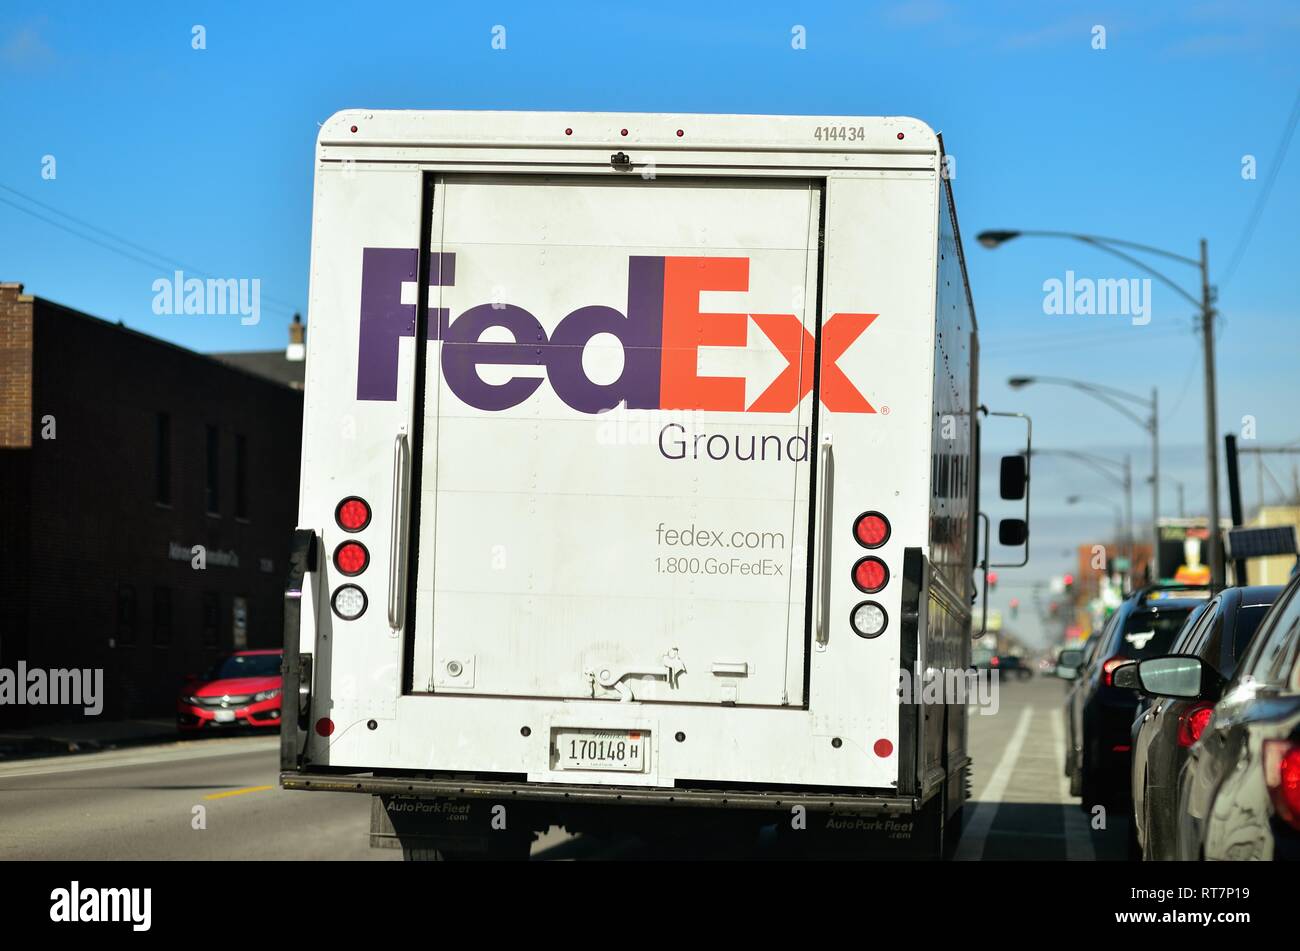 Chicago, Illinois, USA. Federal Express Ground delivery truck double parked on a city street. Stock Photo